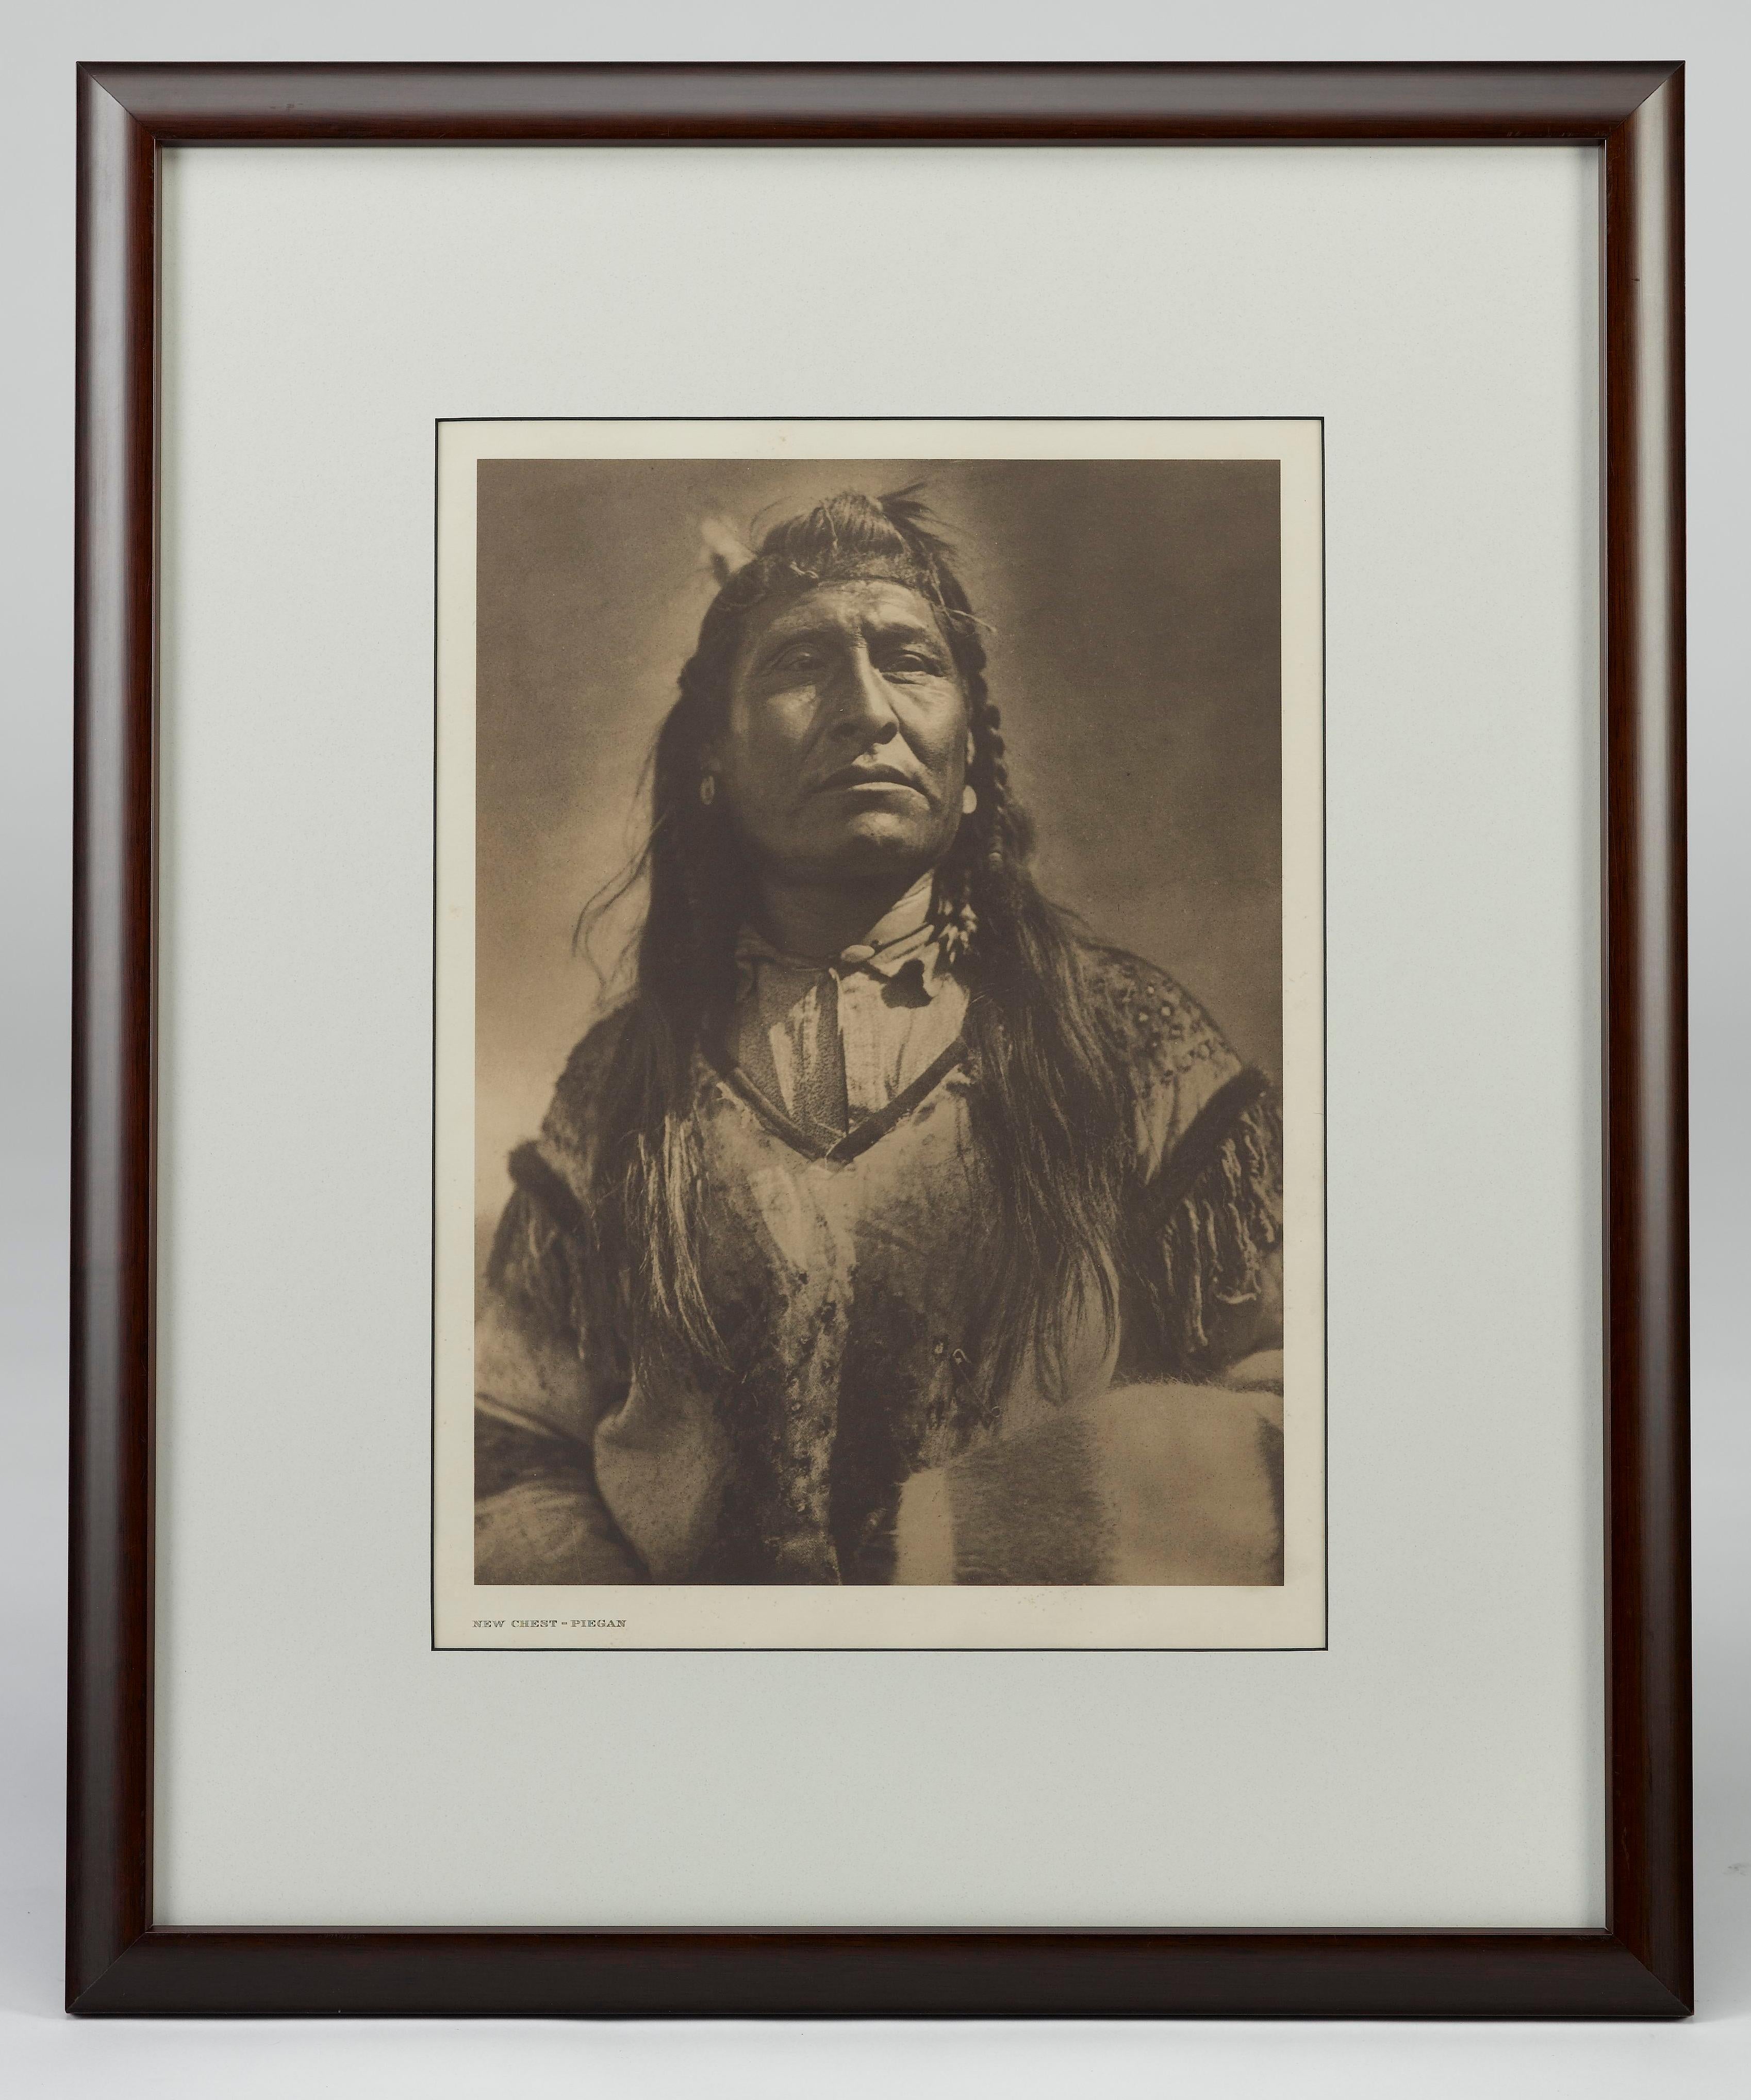 Presented is a fine photogravure portrait of a Piegan man named New Chest by Edward Curtis. The image is Plate 200 from Supplementary Portfolio 6 of Edward Curtis' epic project The North American Indian. The sixth portfolio volume featured the